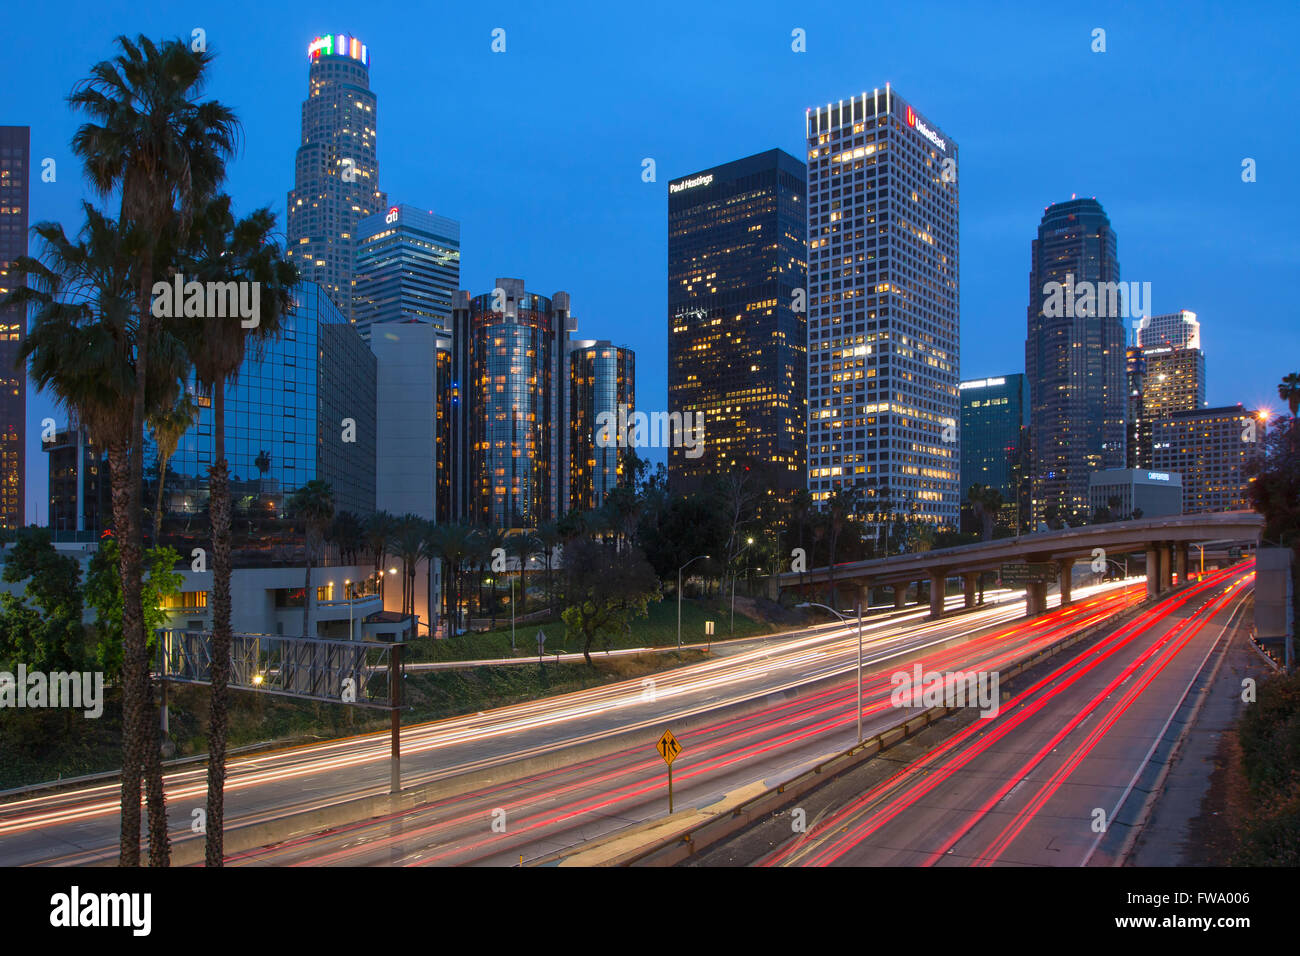 Harbor freeway in Los Angeles at night Stock Photo